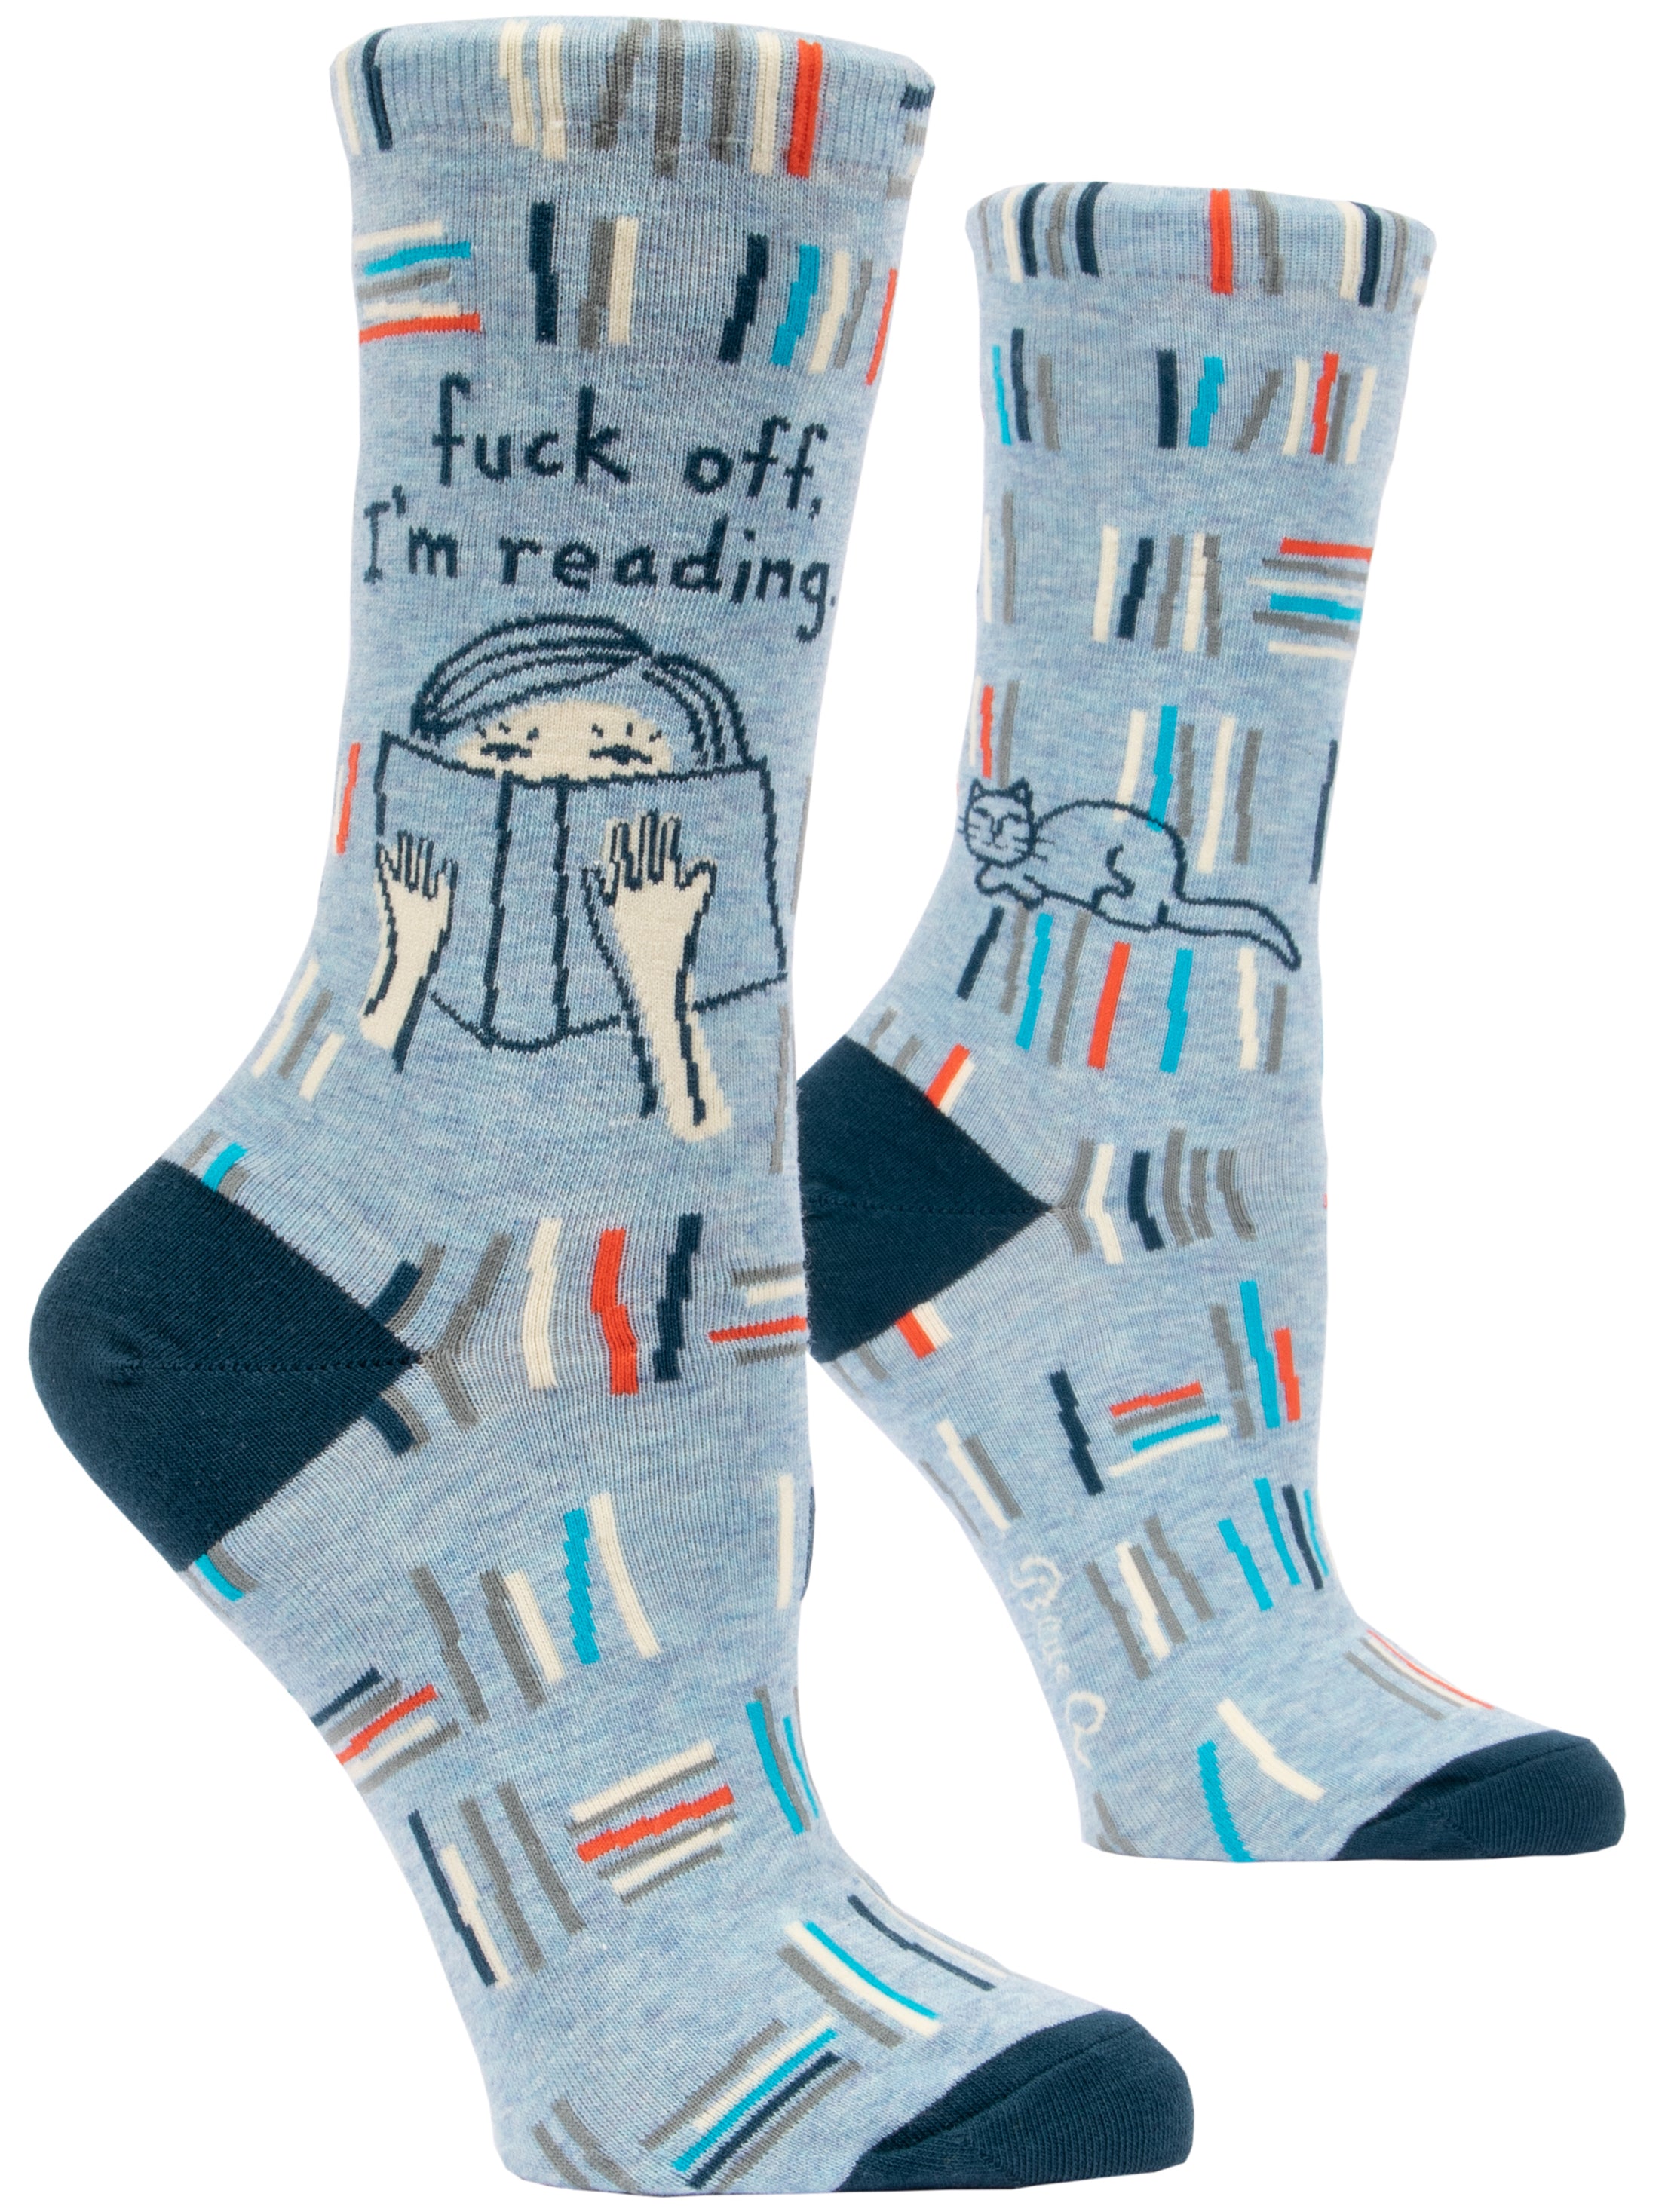 blue socks with multicolour books and a cartoon of  a cat and someone reading above it says fuck off, i'm reading